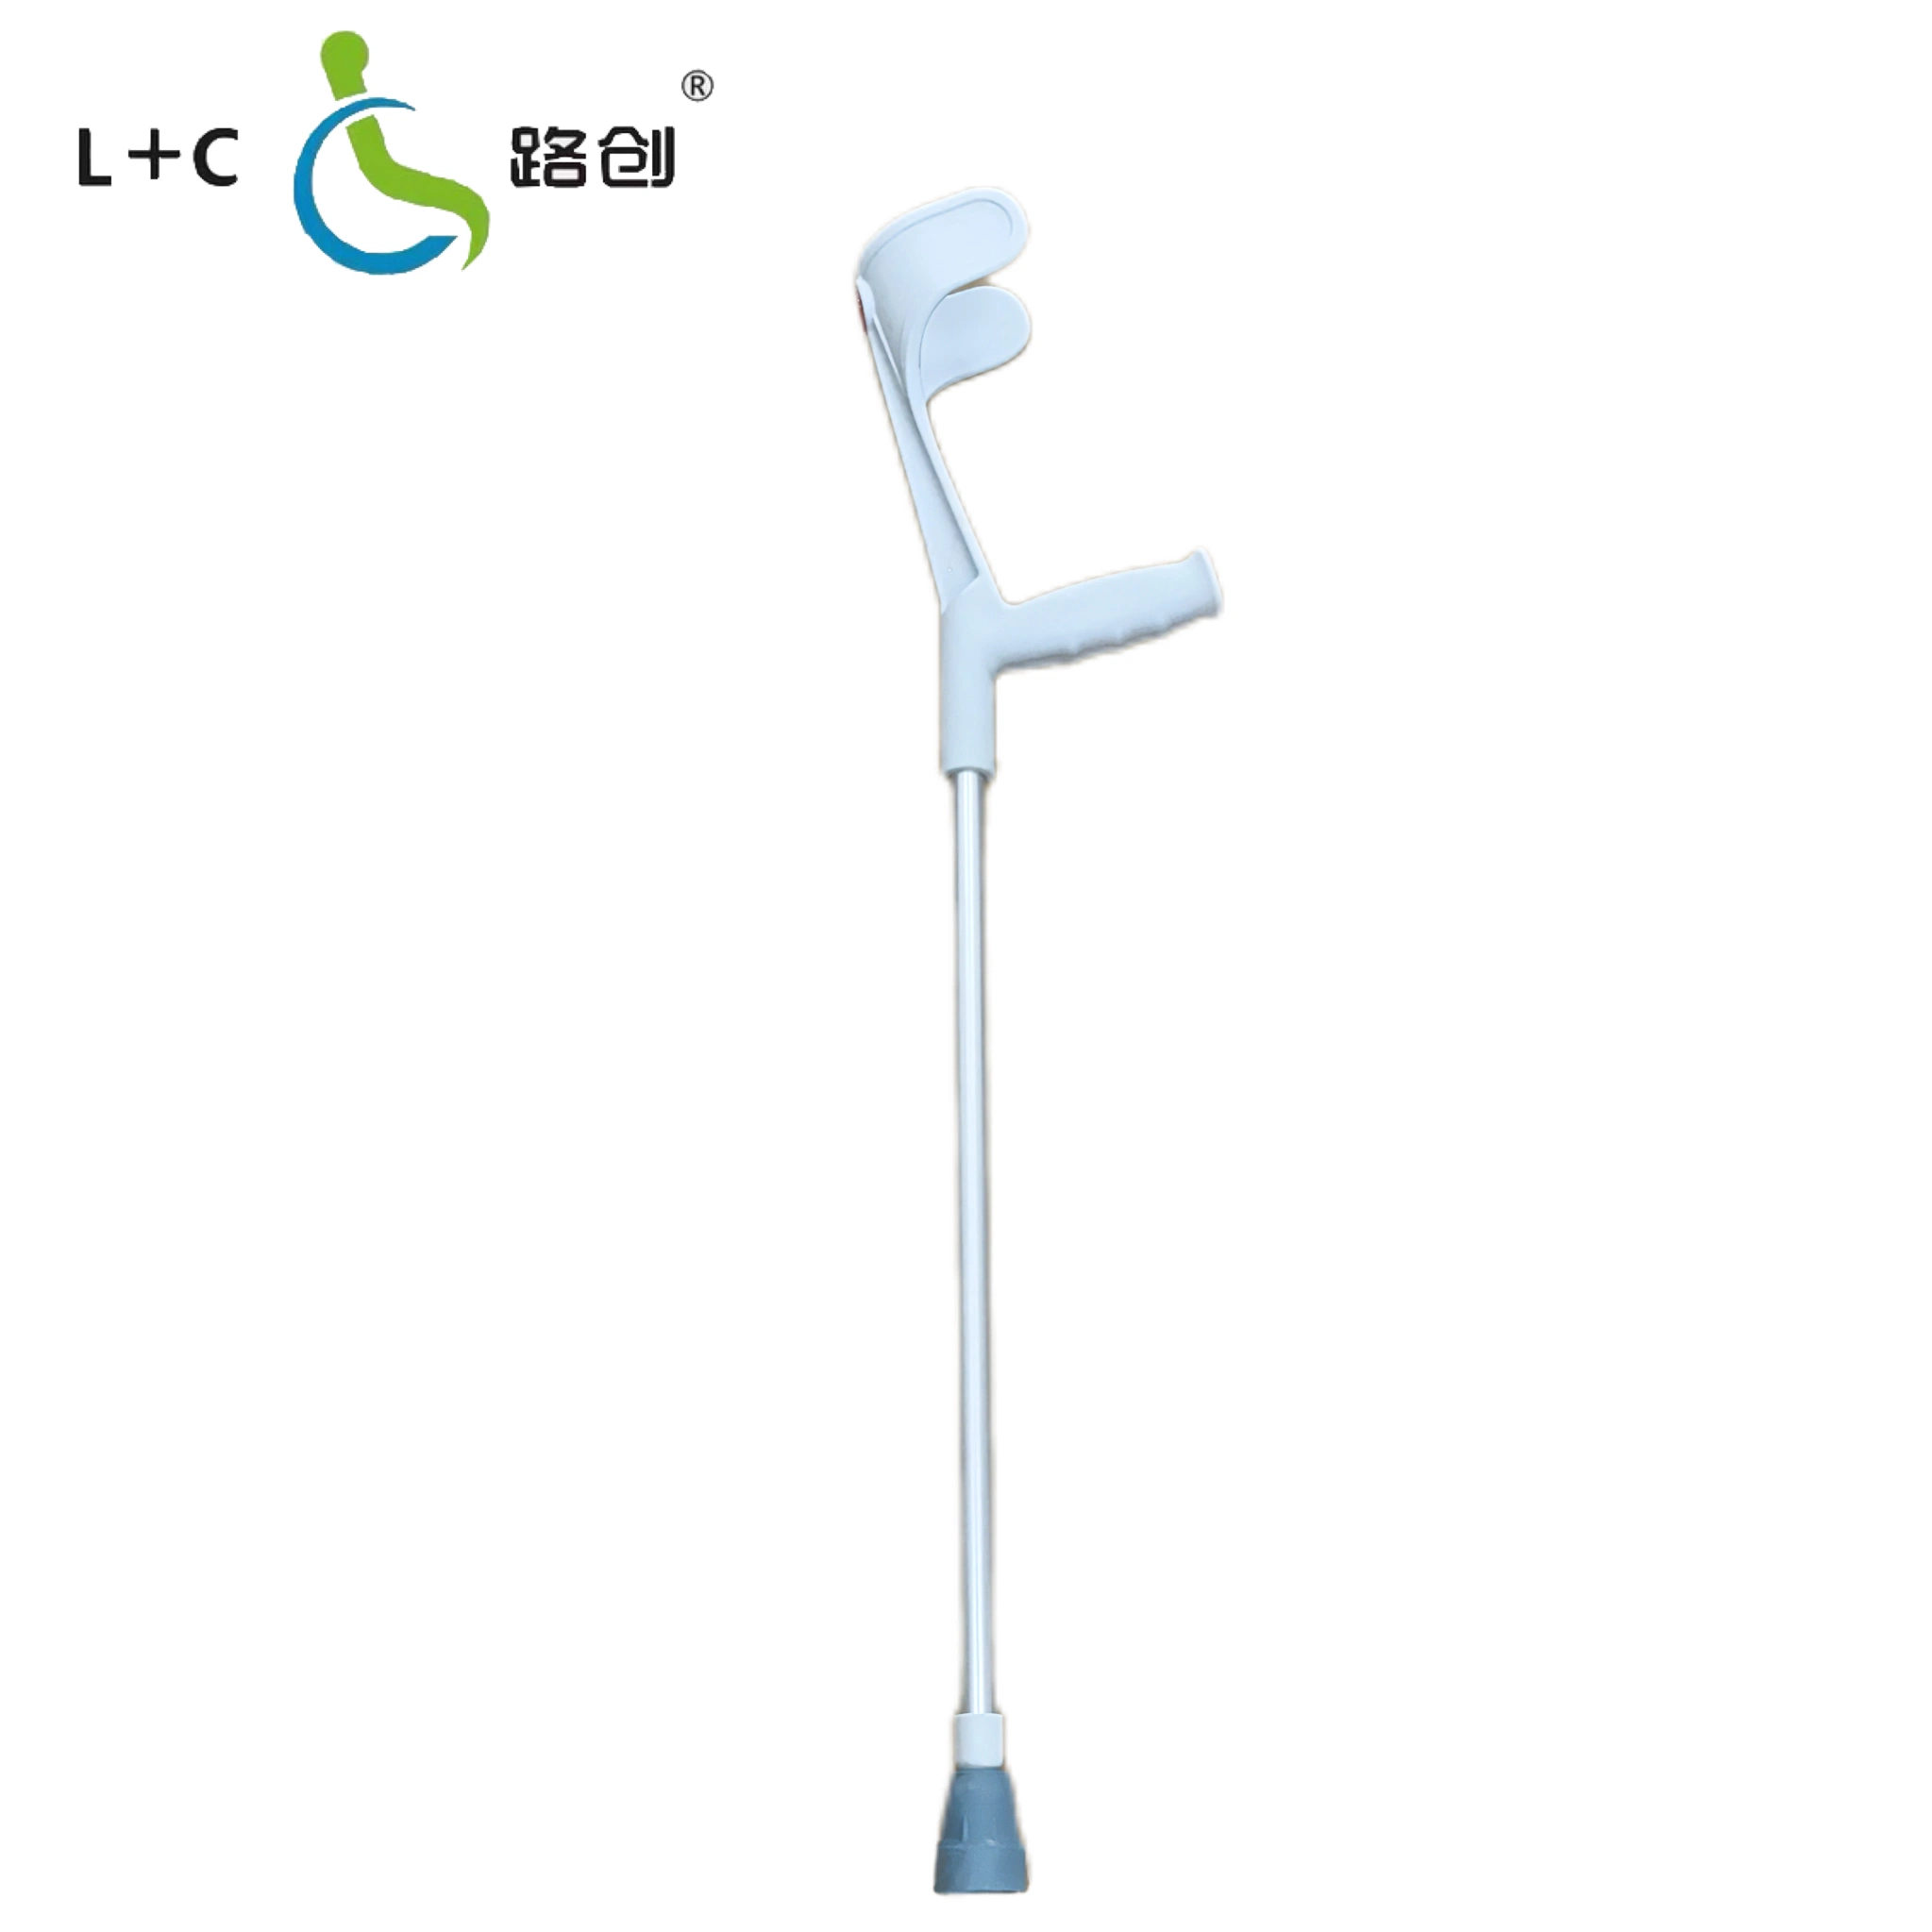 China Factory High-Strength Aluminum Walking Stick for The Elderly and Disabled Crutch